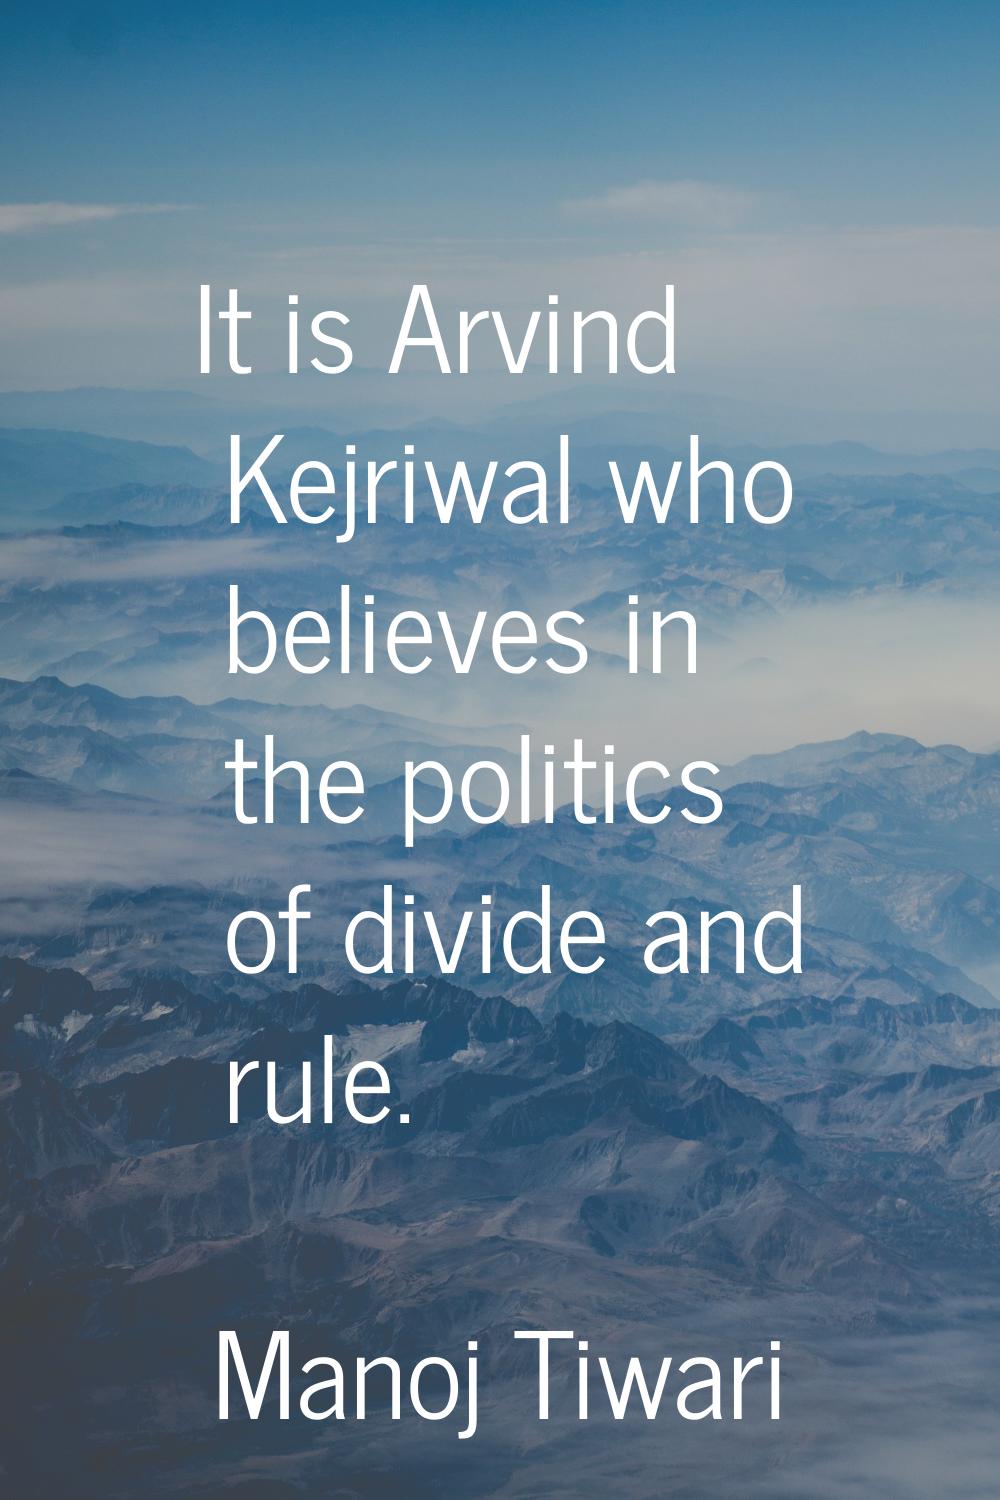 It is Arvind Kejriwal who believes in the politics of divide and rule.